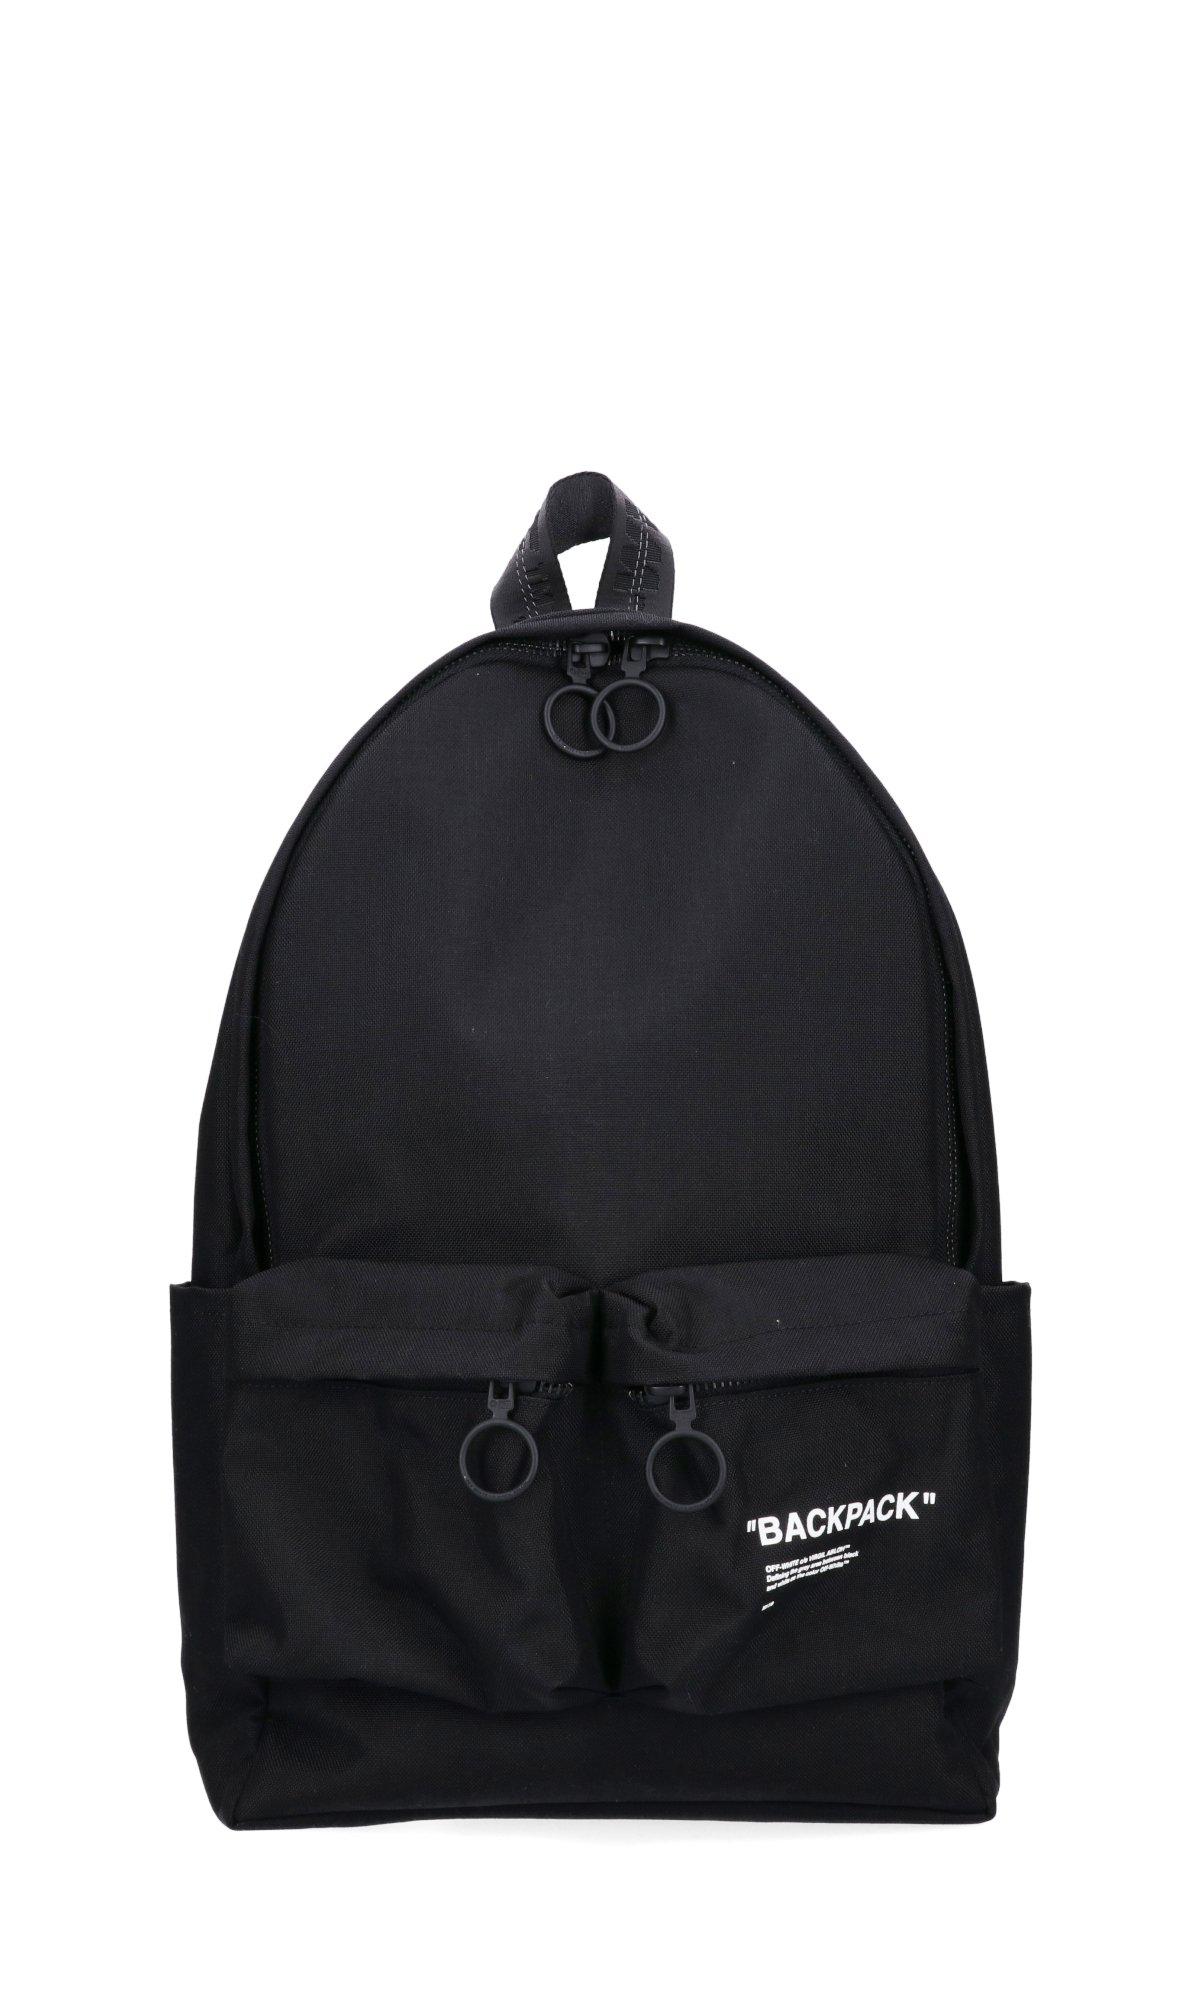 Off-White c/o Virgil Abloh Synthetic Quote Backpack in Black for Men - Lyst